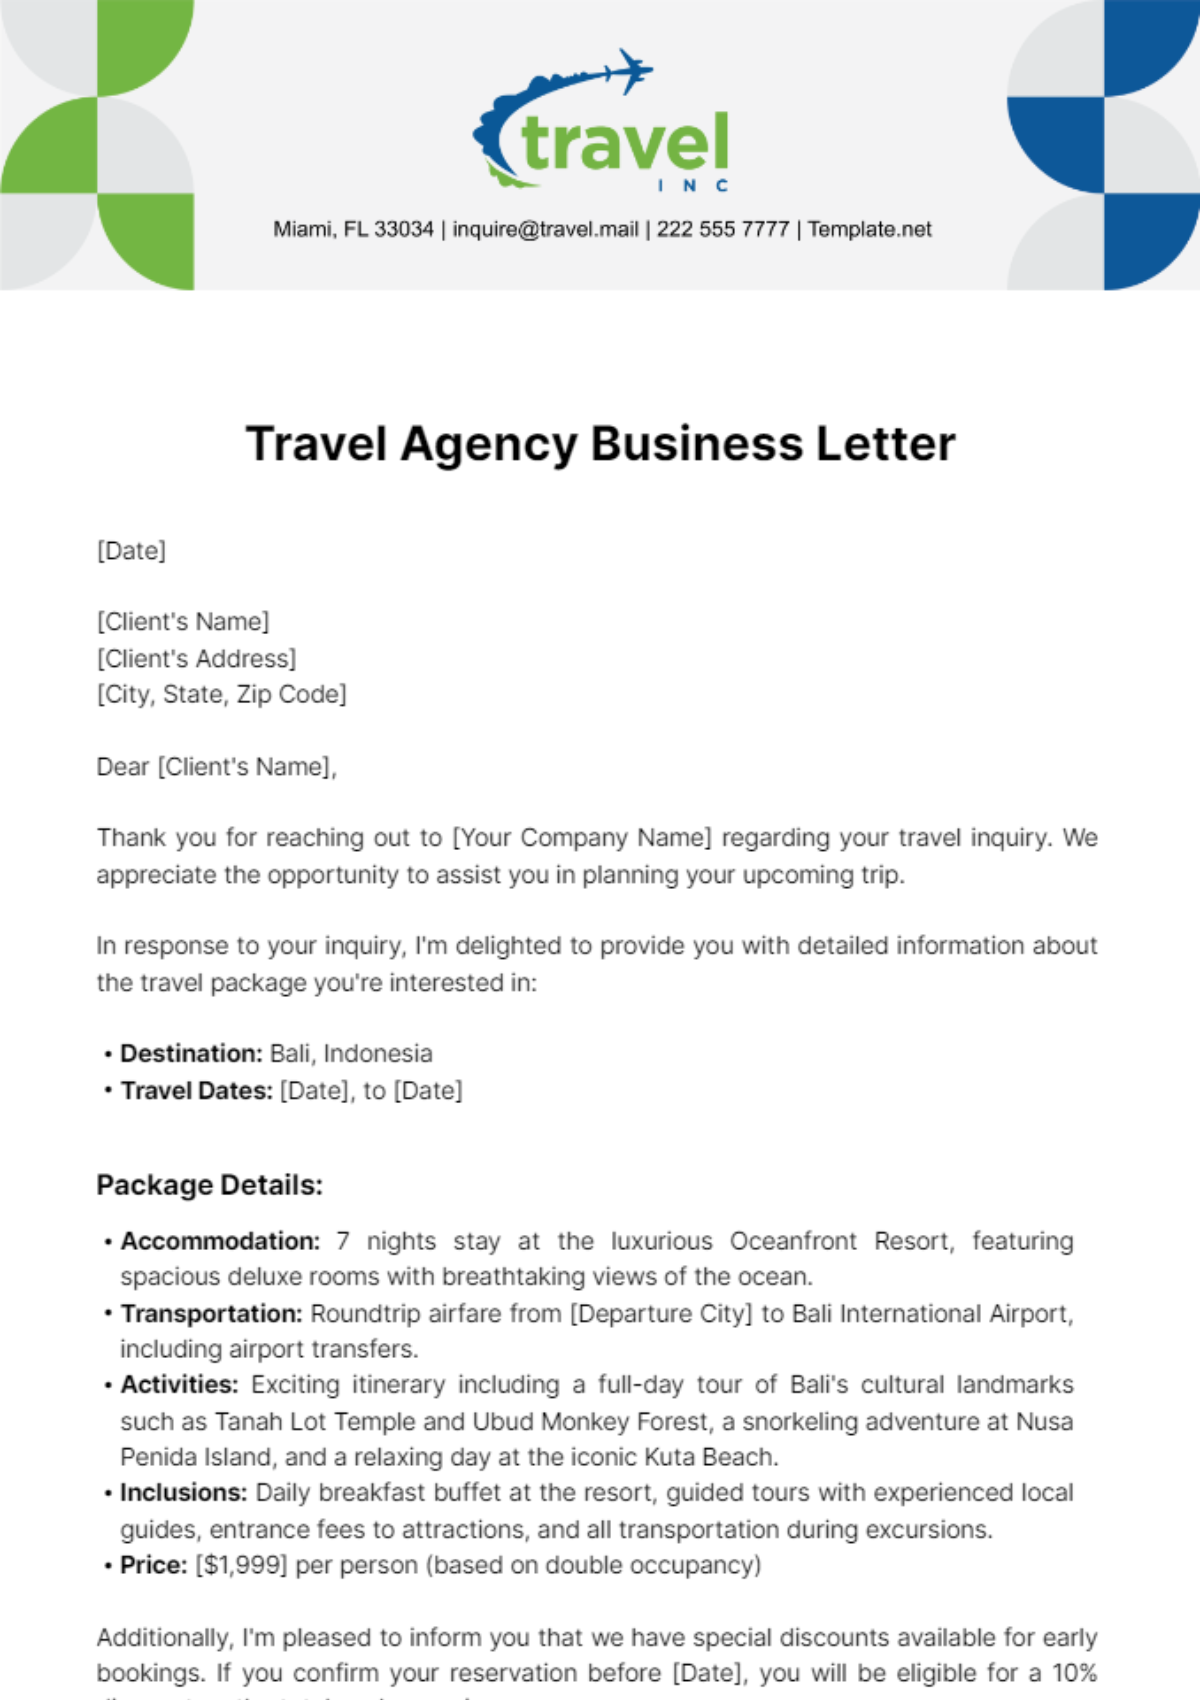 Travel Agency Business Letter Template